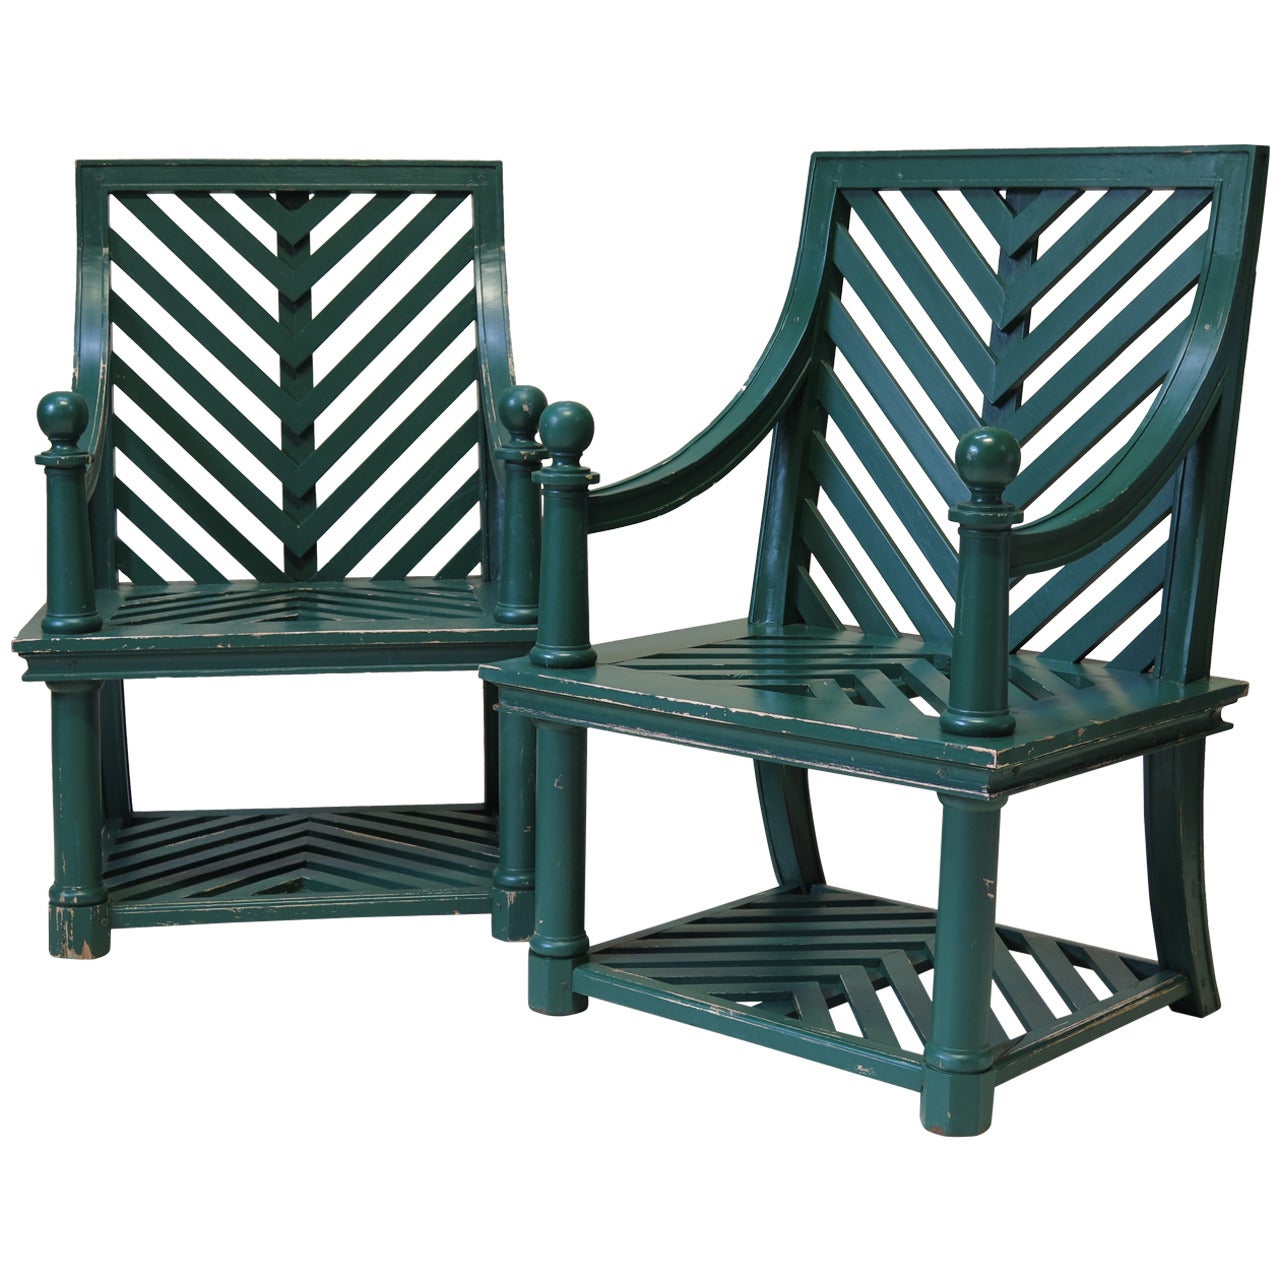 Pair of Garden Chairs Attributed to Emilio Terry, France Mid-20th Century